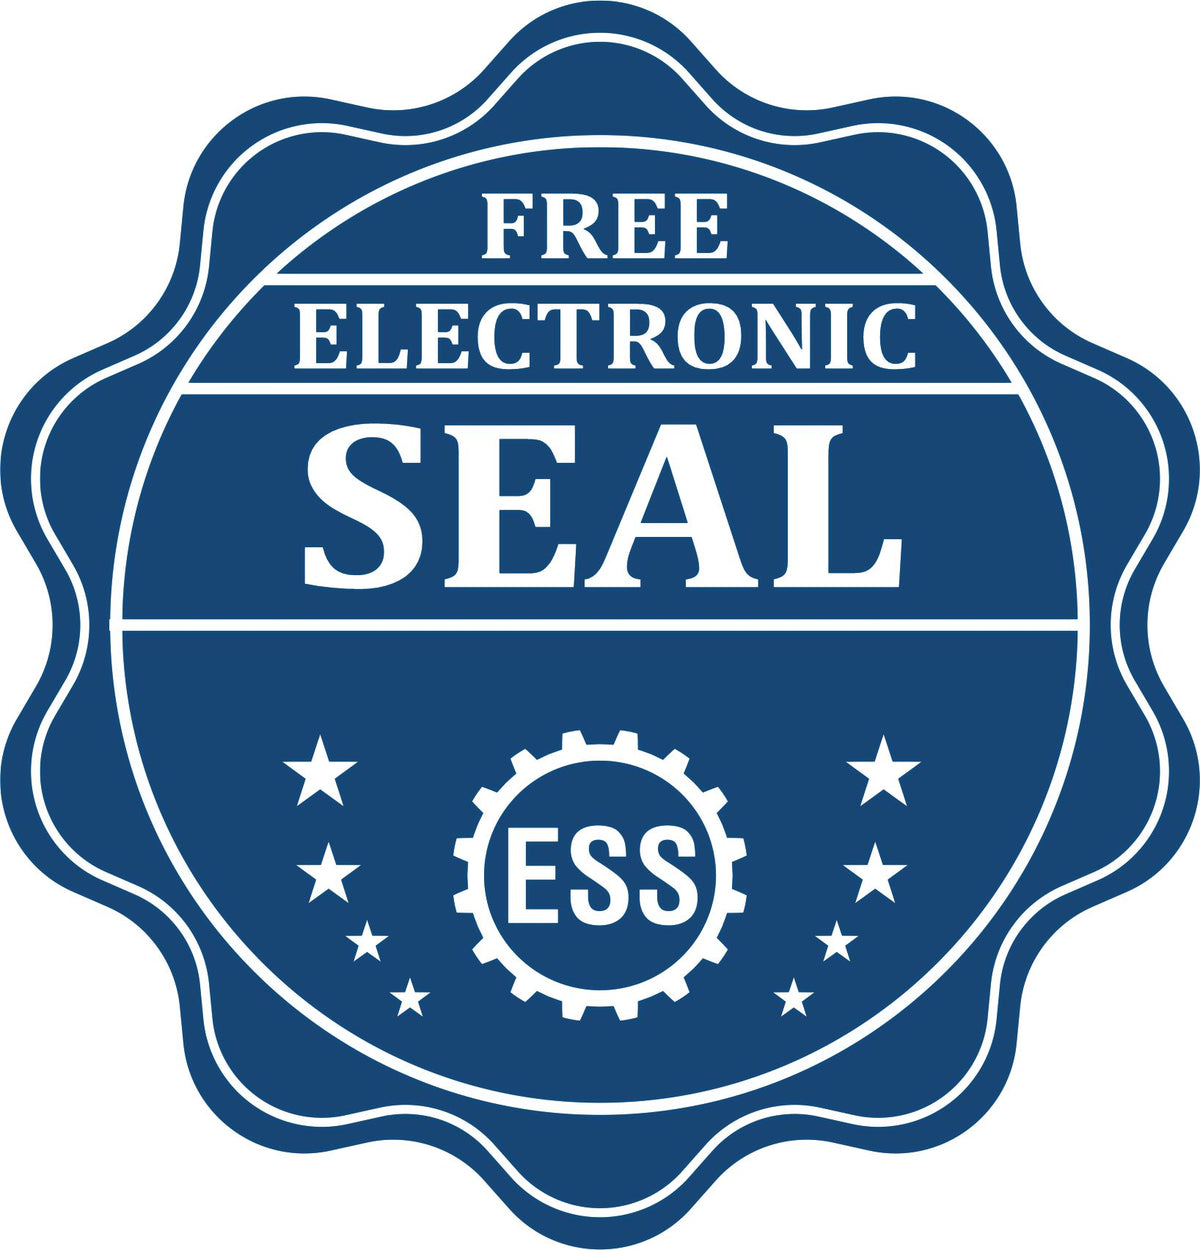 A badge showing a free electronic seal for the Hybrid Nebraska Landscape Architect Seal with stars and the ESS gear on the emblem.